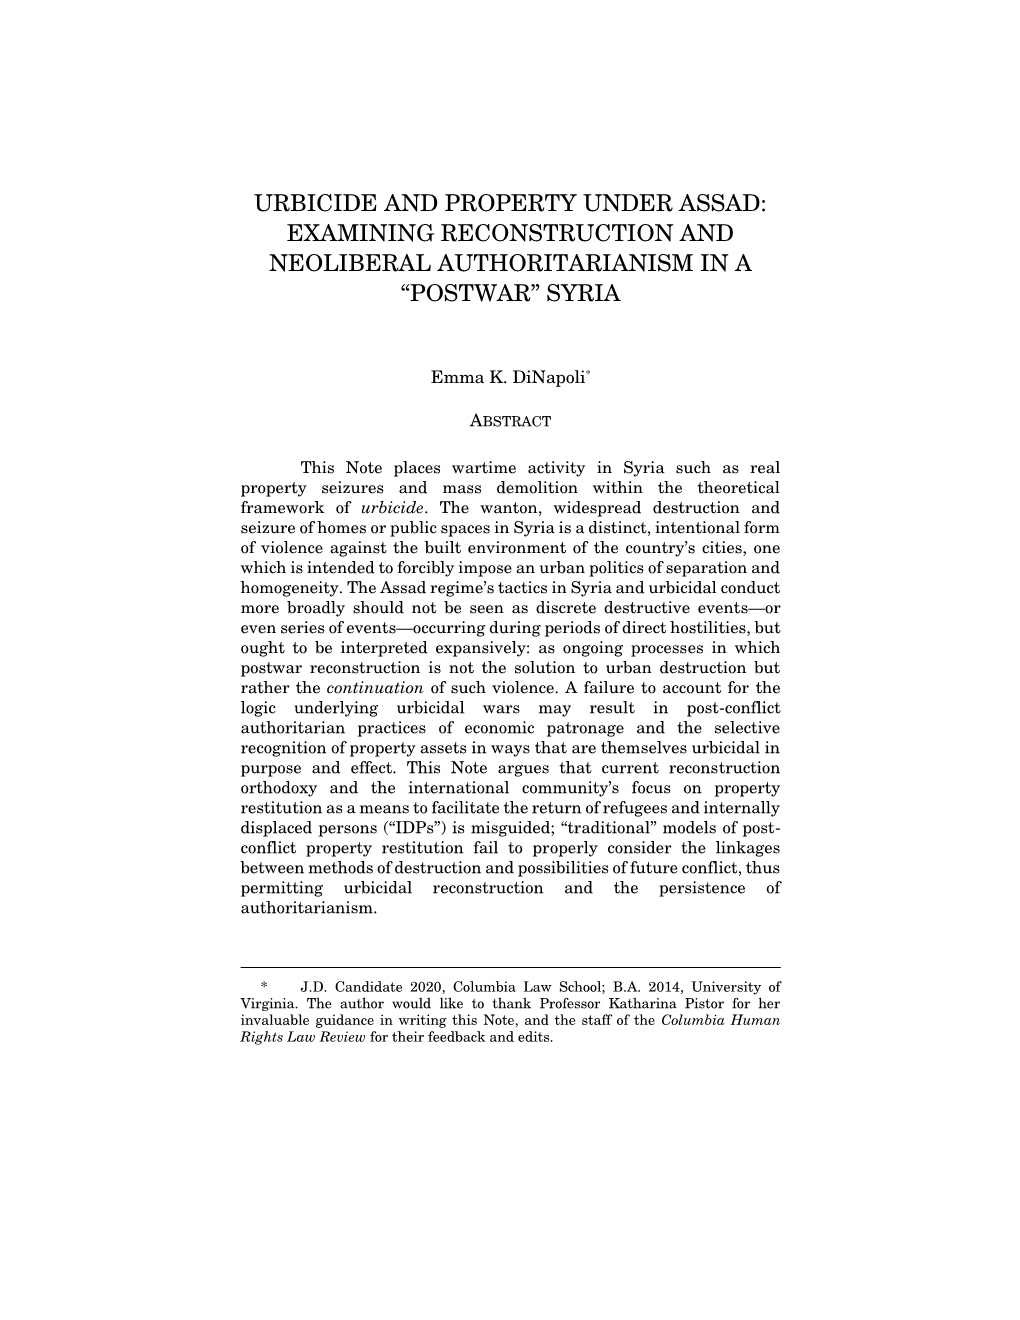 Urbicide and Property Under Assad: Examining Reconstruction and Neoliberal Authoritarianism in a “Postwar” Syria